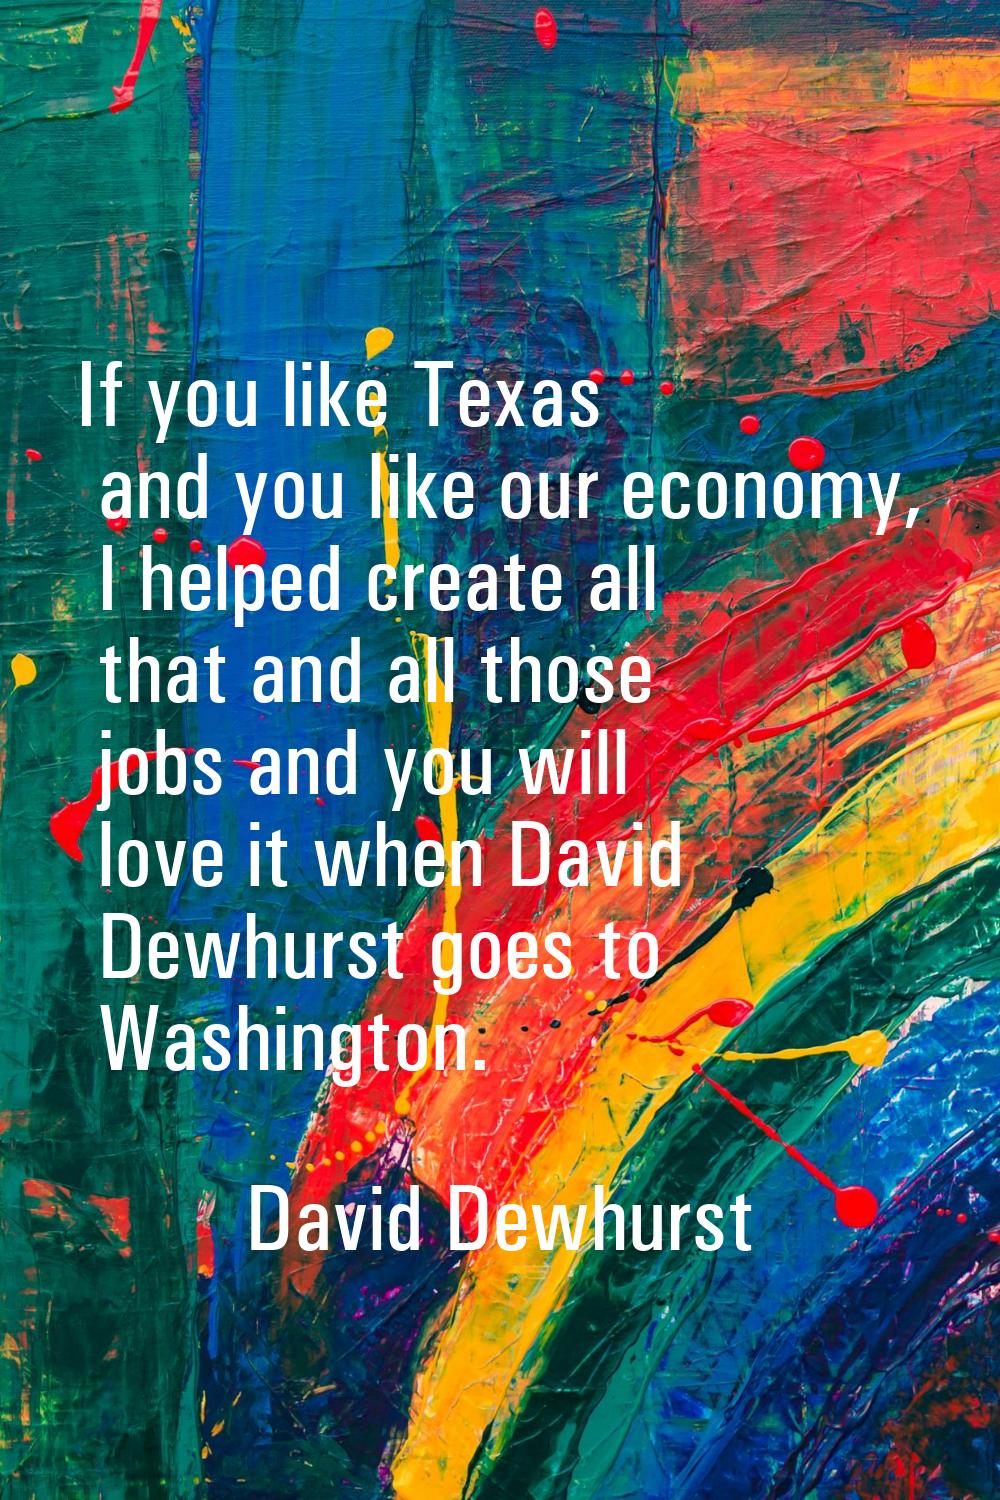 If you like Texas and you like our economy, I helped create all that and all those jobs and you wil